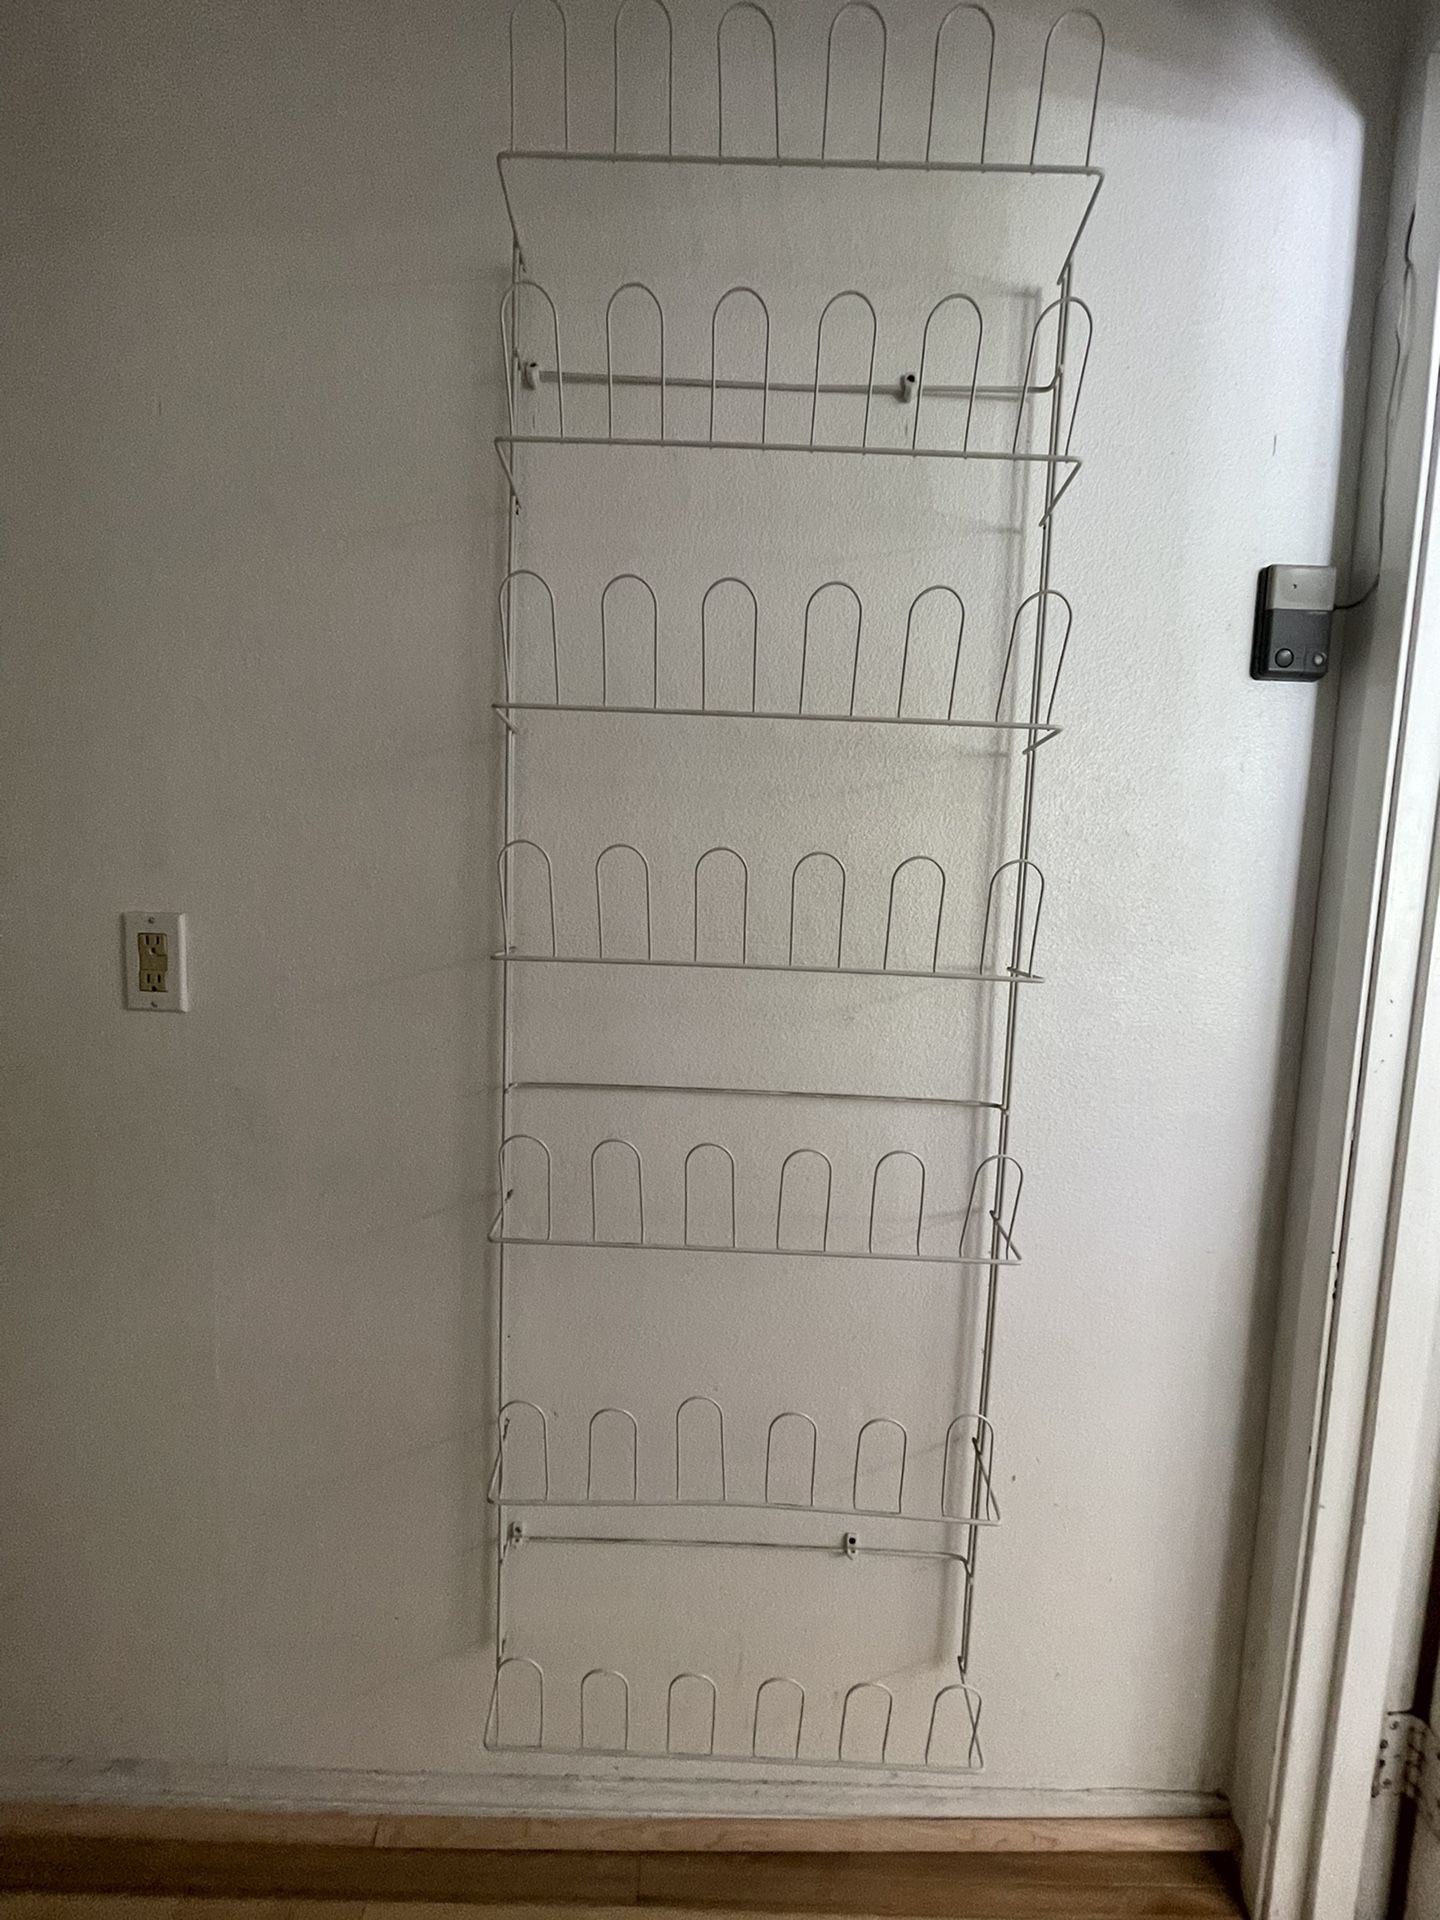 21 pair Of Shoes Rack Organizer On The Wall 68 Inch Tall